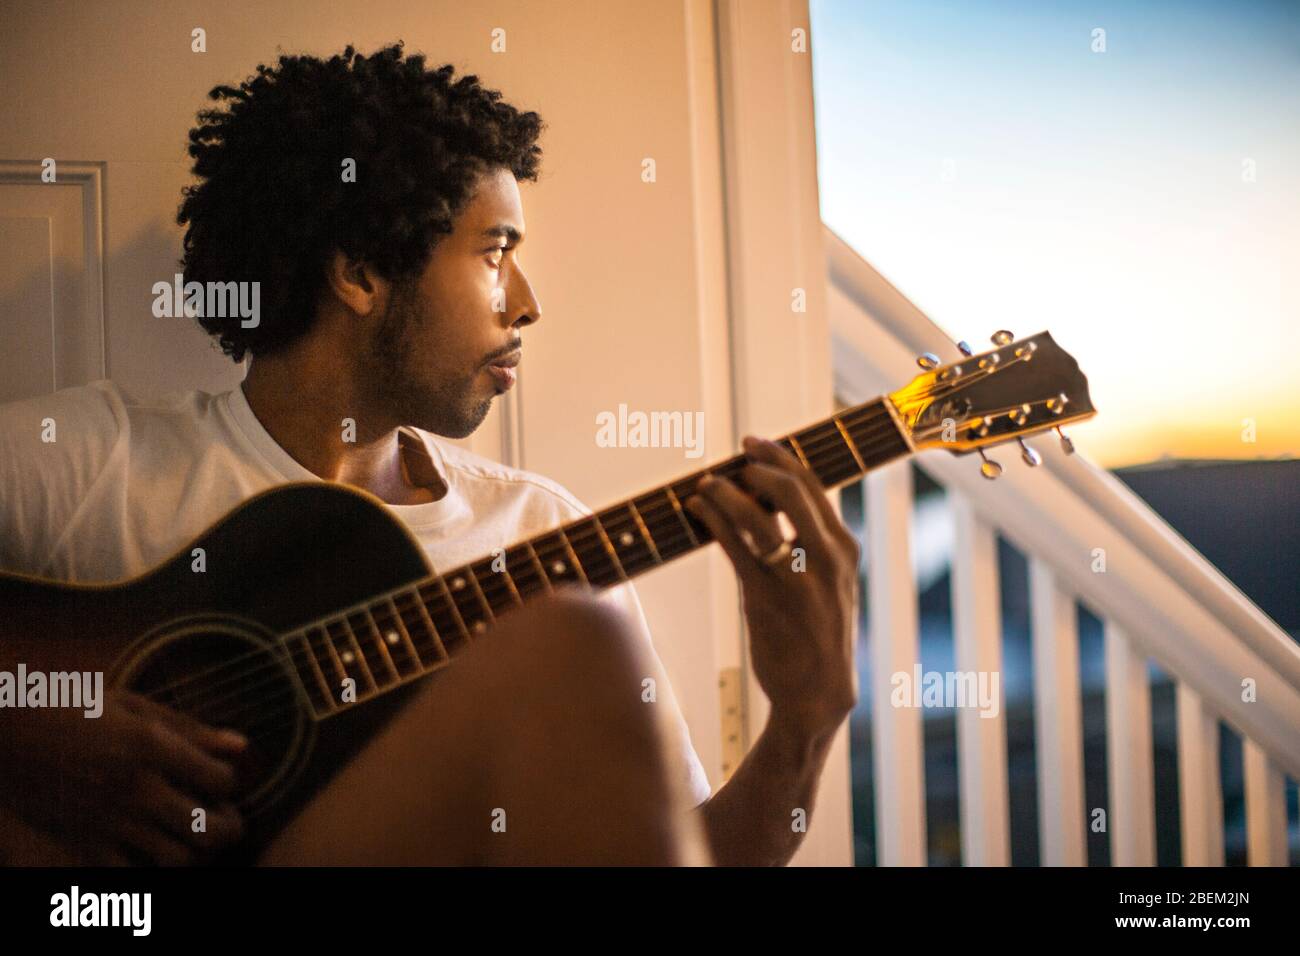 Pensive young man playing an acoustic guitar Stock Photo